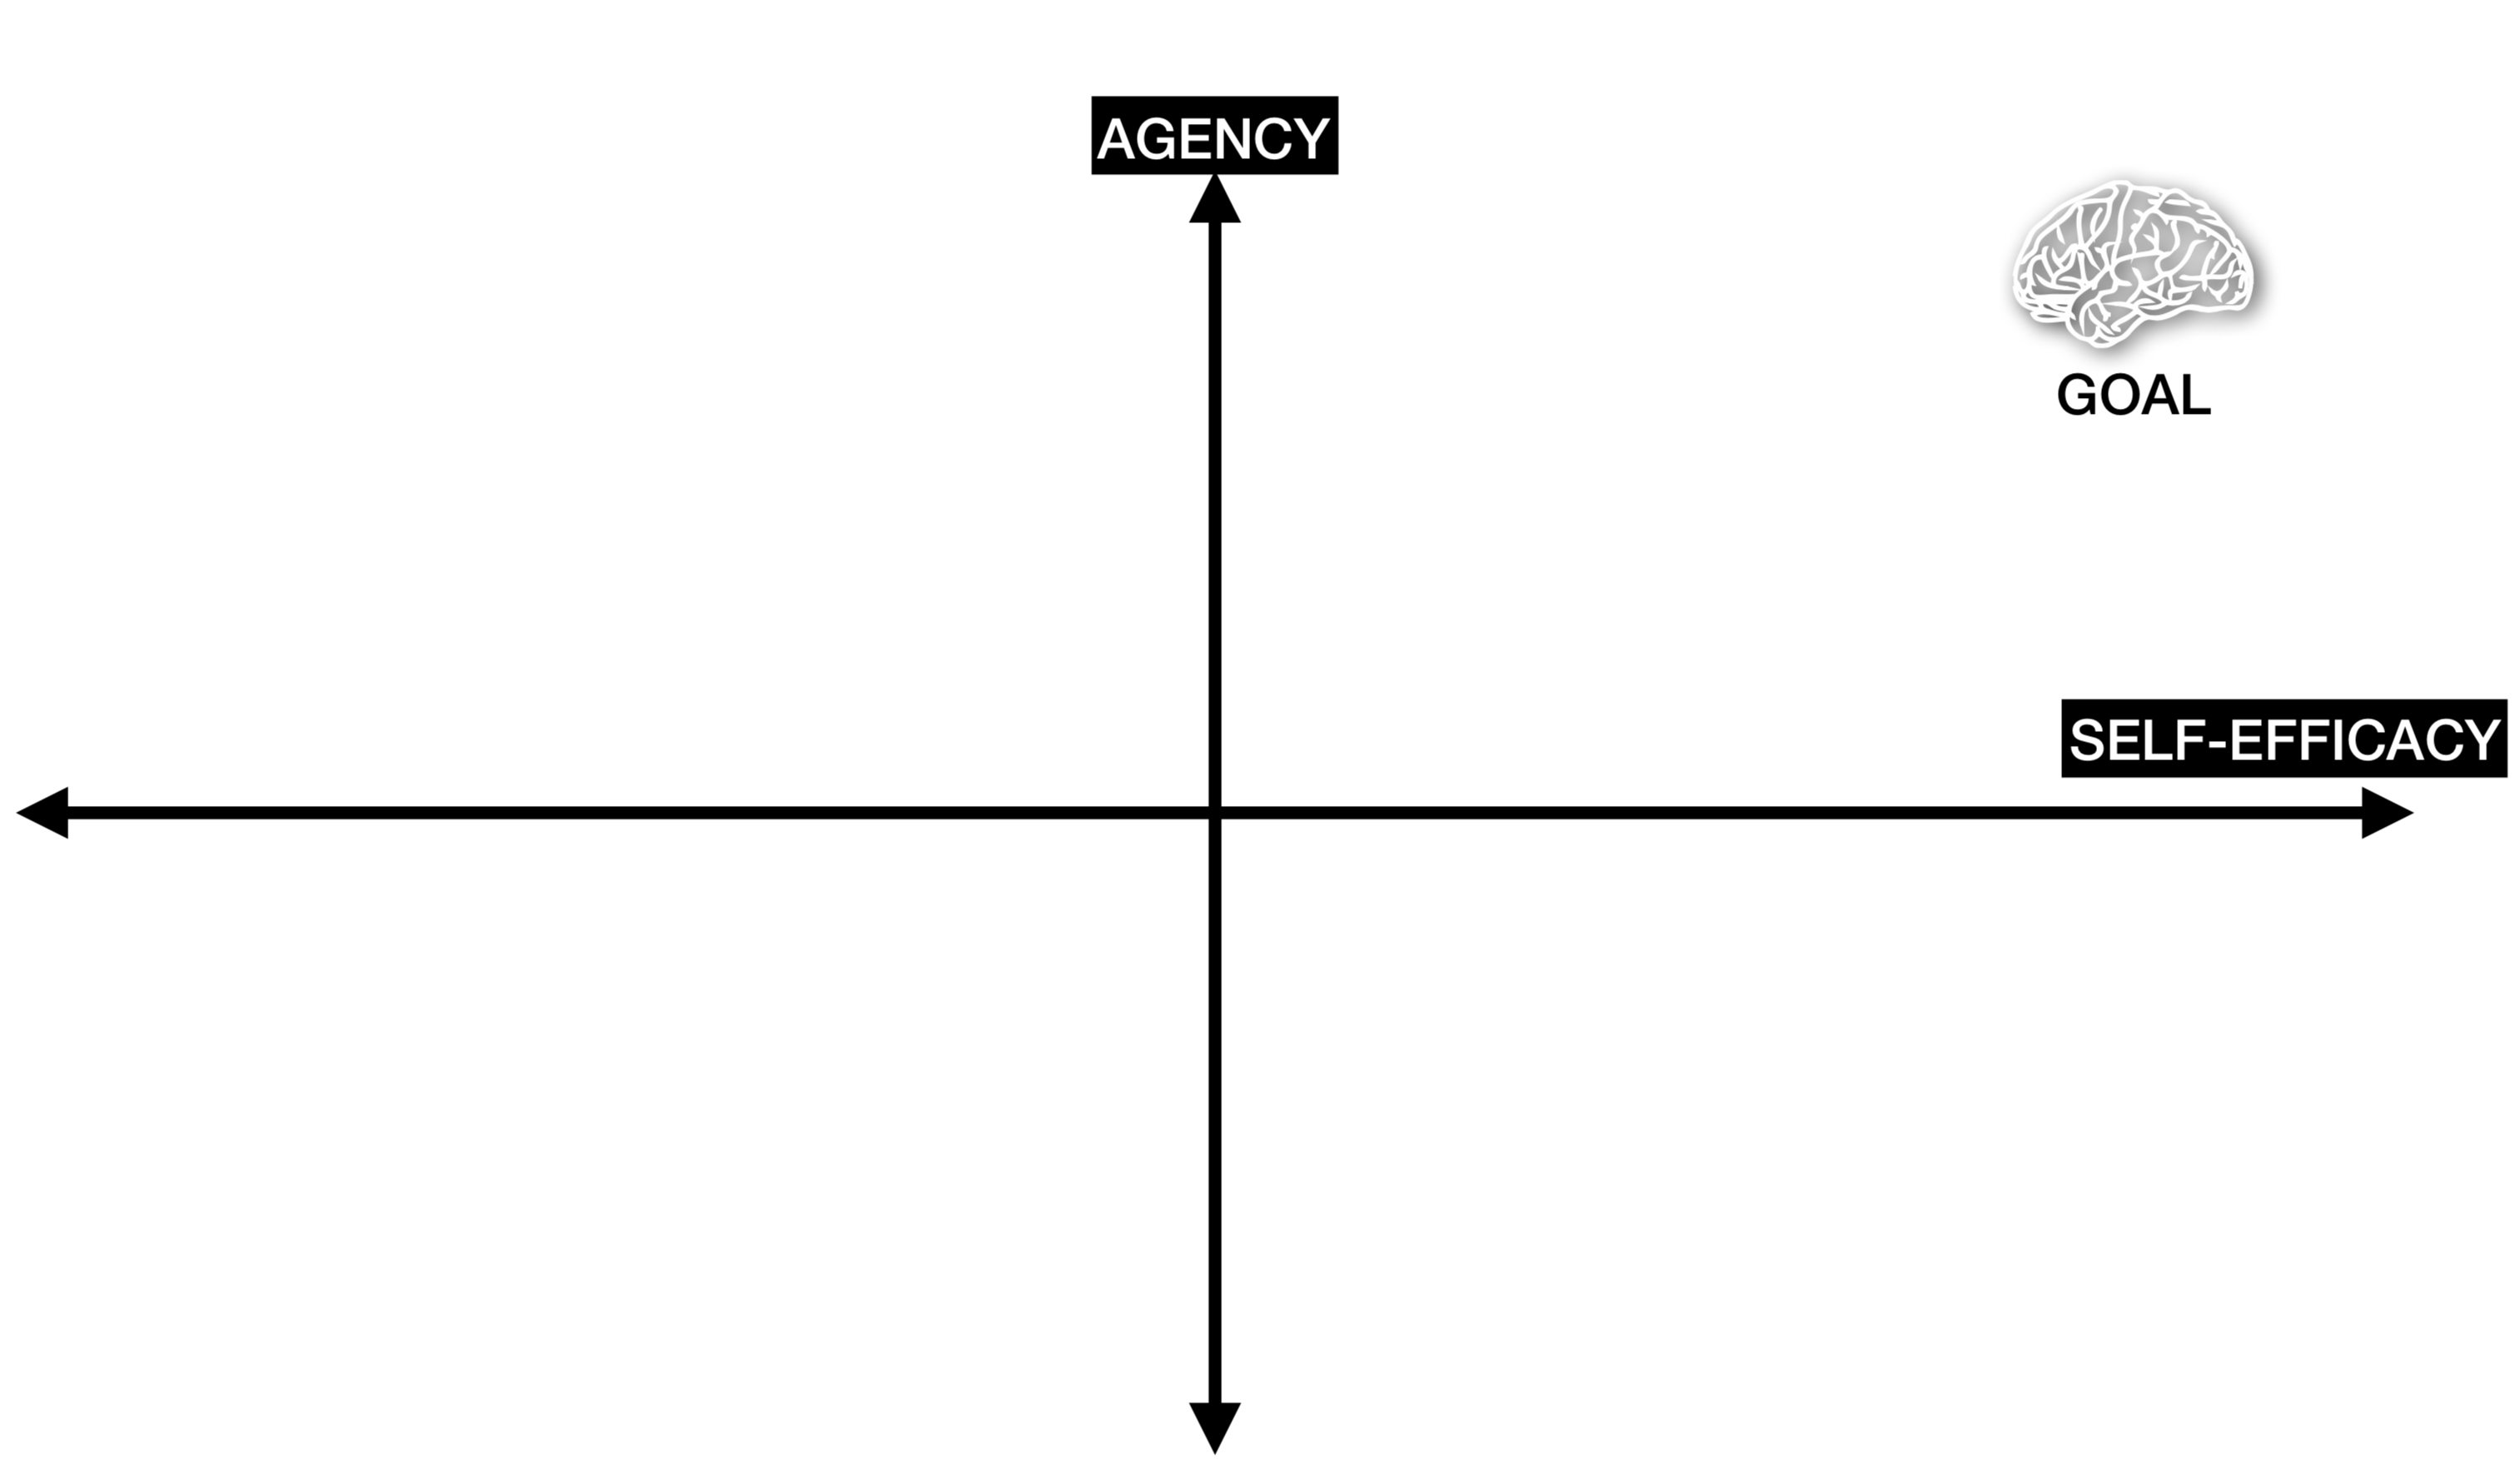 agencychart.png